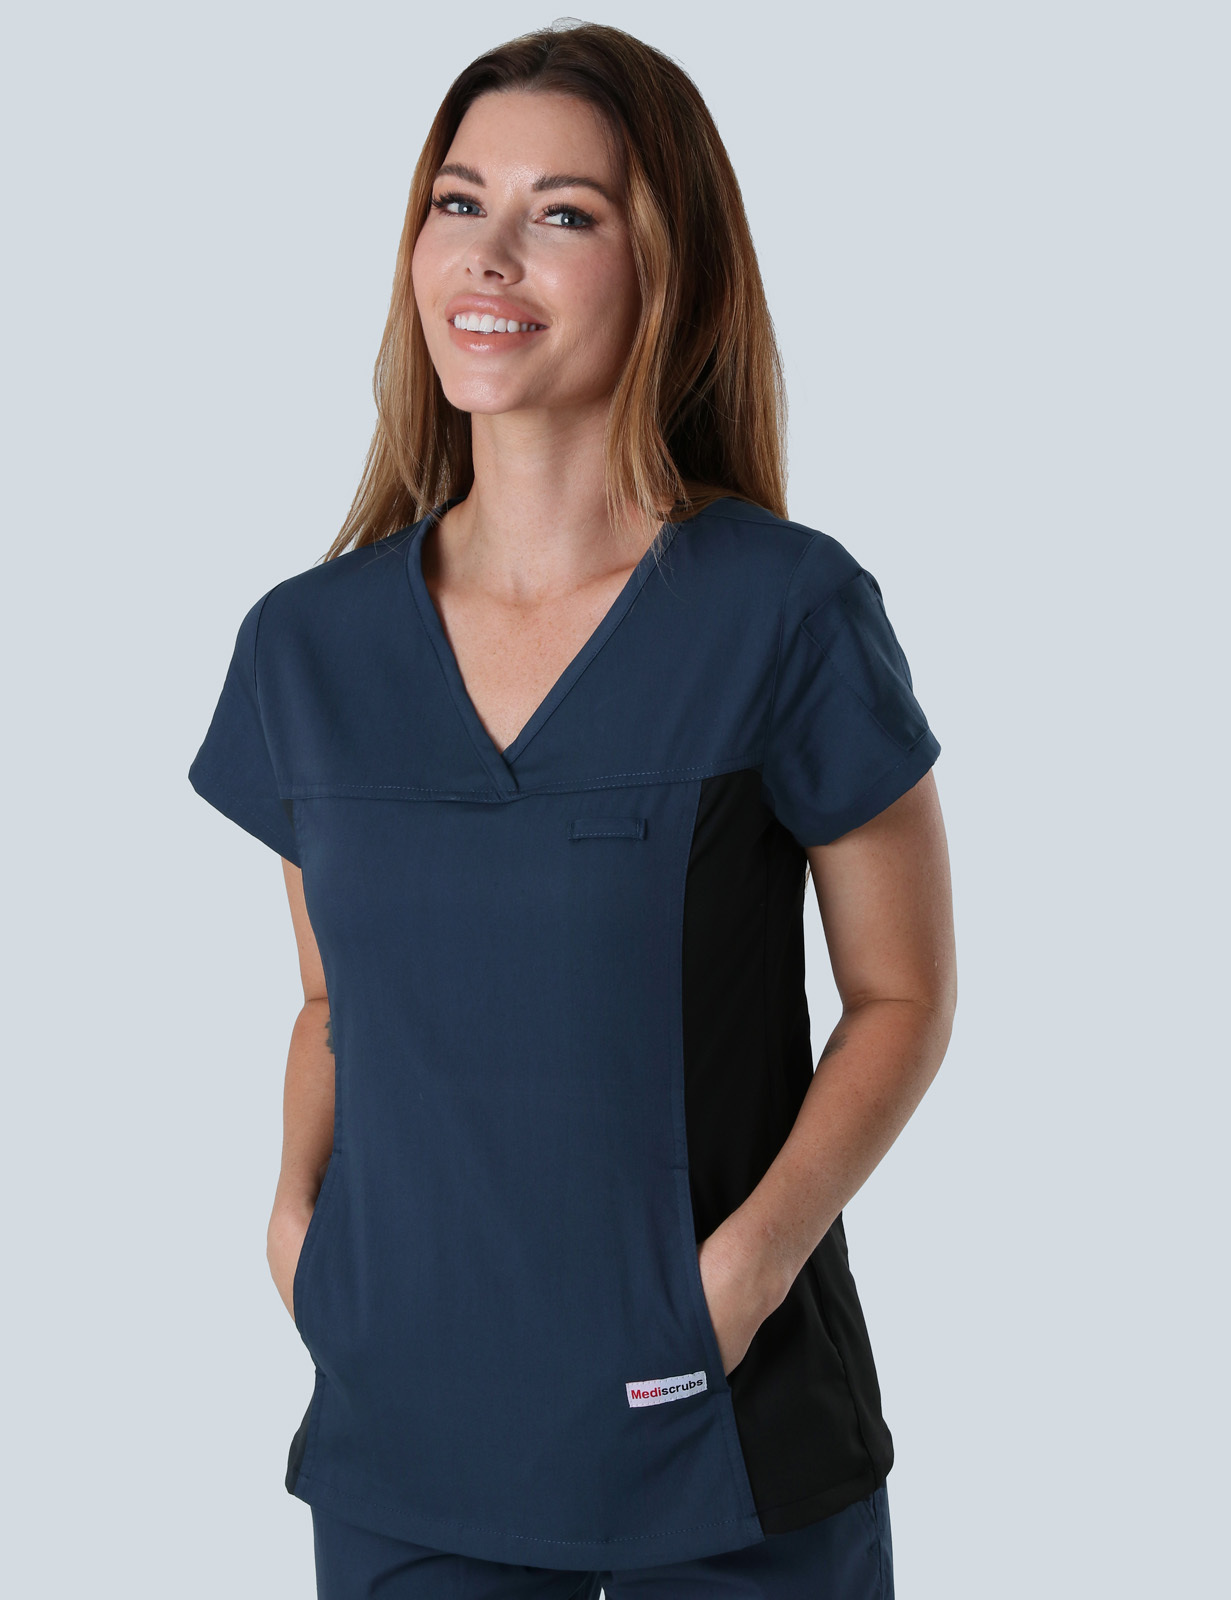 PAH - Vascular Sonographer (Women's Fit Spandex Scrub Top and Cargo Pants in Navy incl Logos)